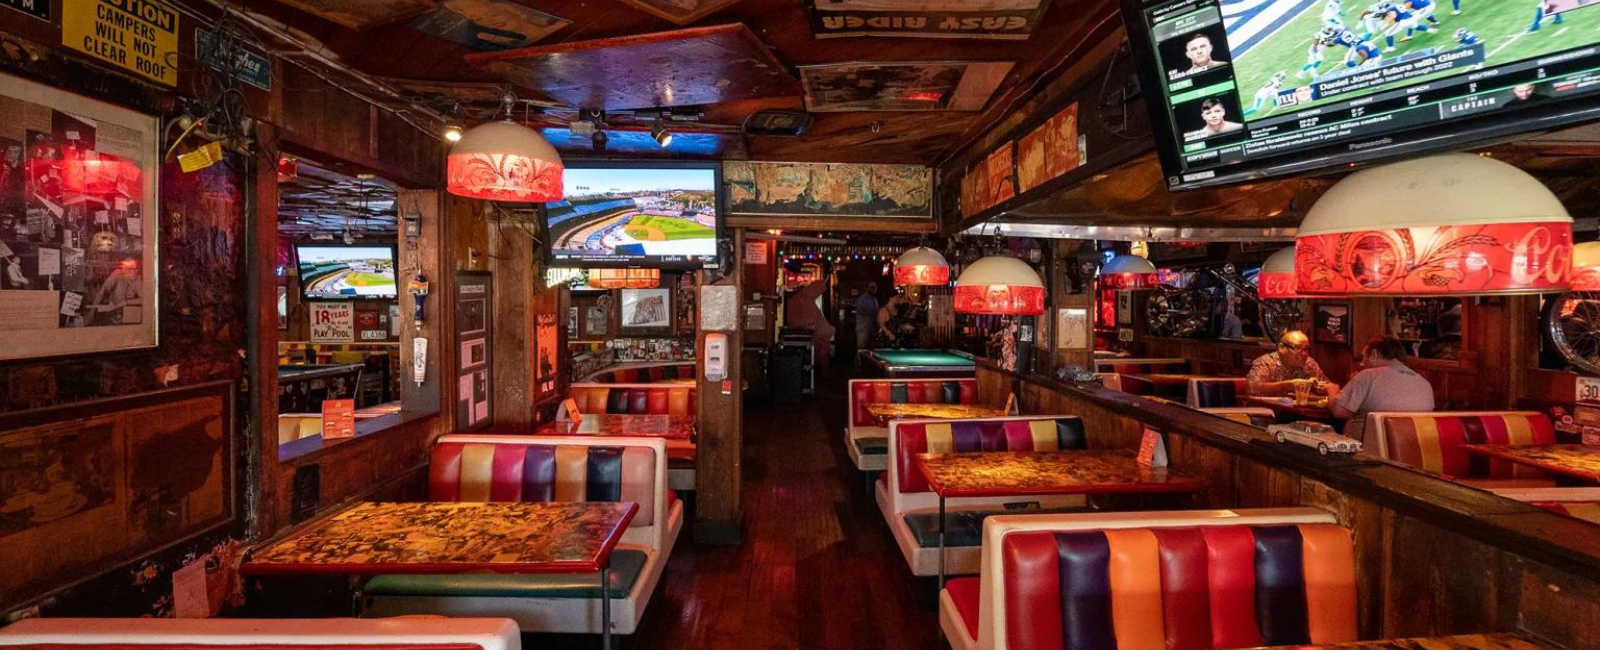 Barney's Beanery seating area